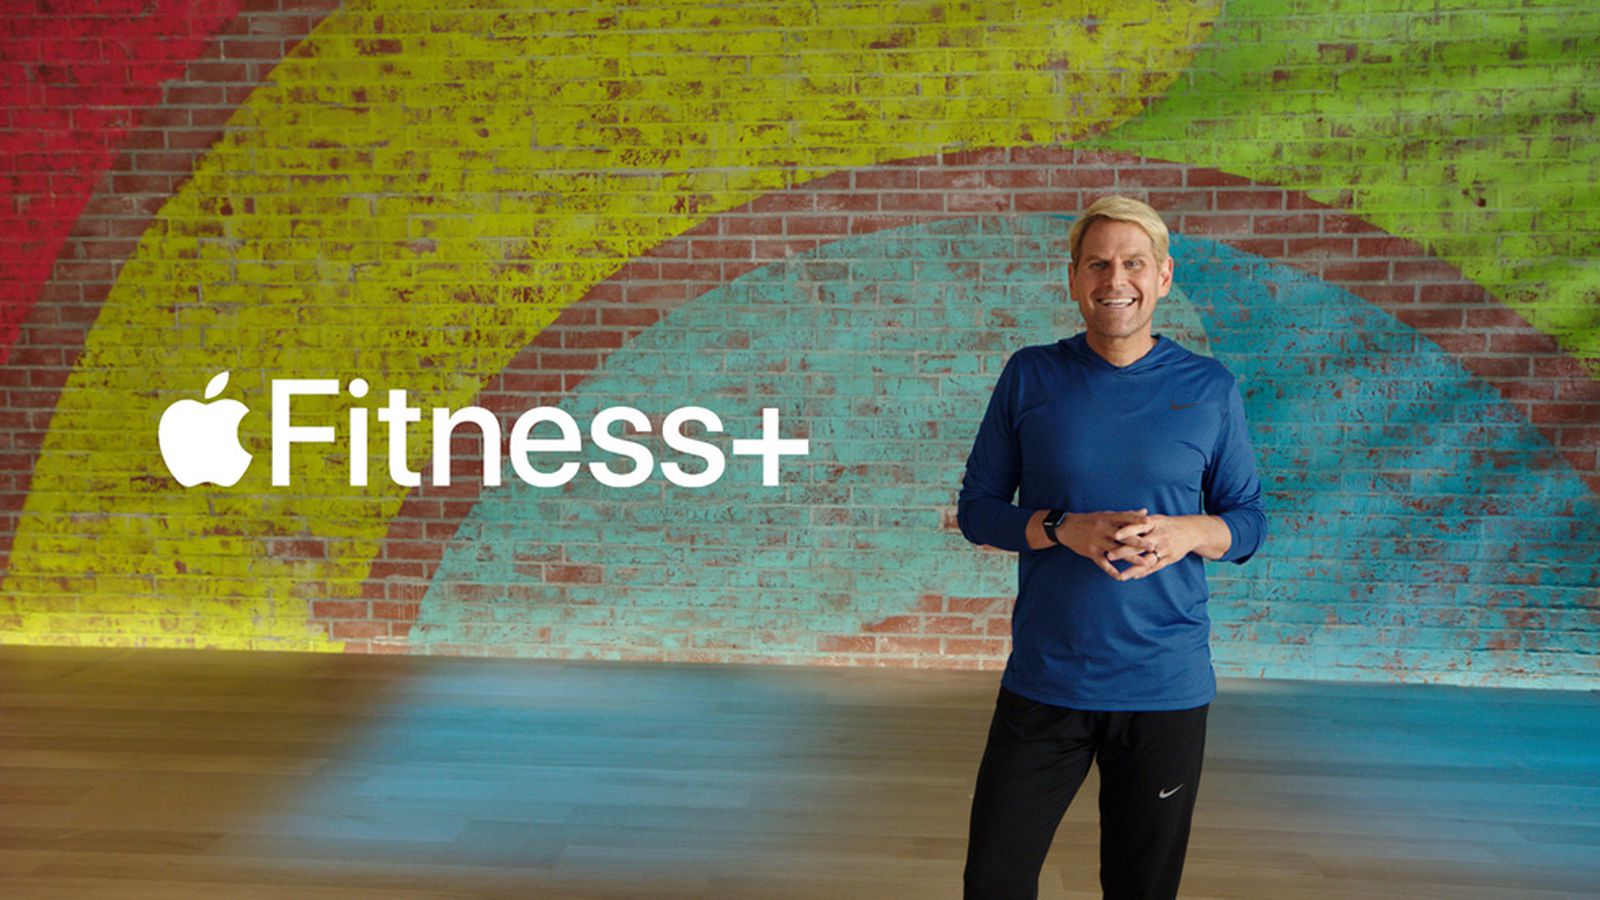 Apple Fitness+ Studio Tours Provide Behind the Scenes Look at Workout Service